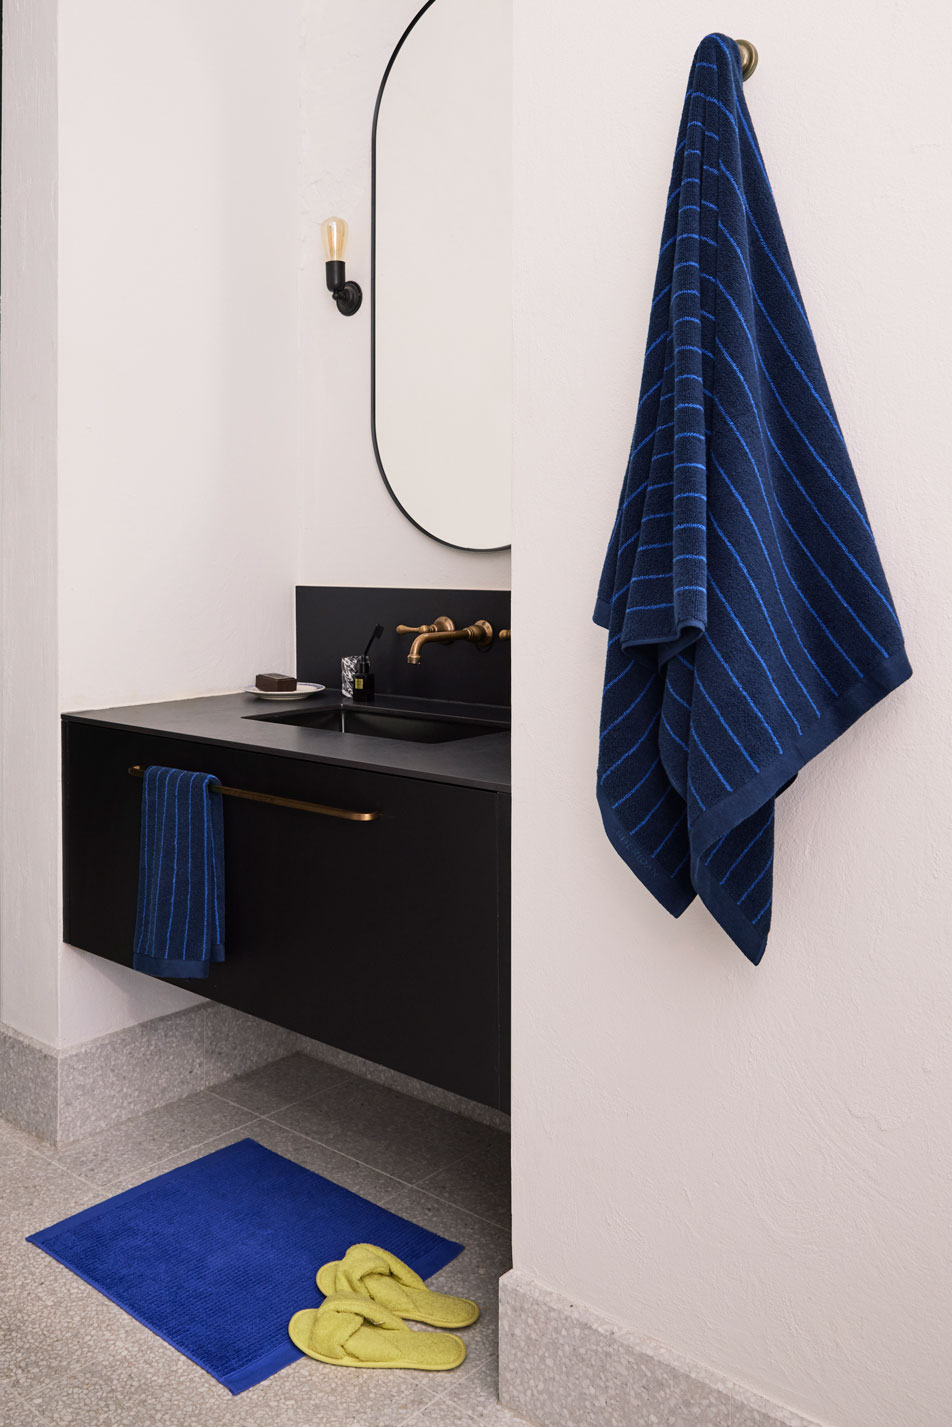 A modern bathroom with a black vanity and oval mirror. On the floor is a small blue bath mat and a pair of yellow slippers. A blue striped towel is hanging from a brass knob on the wall.